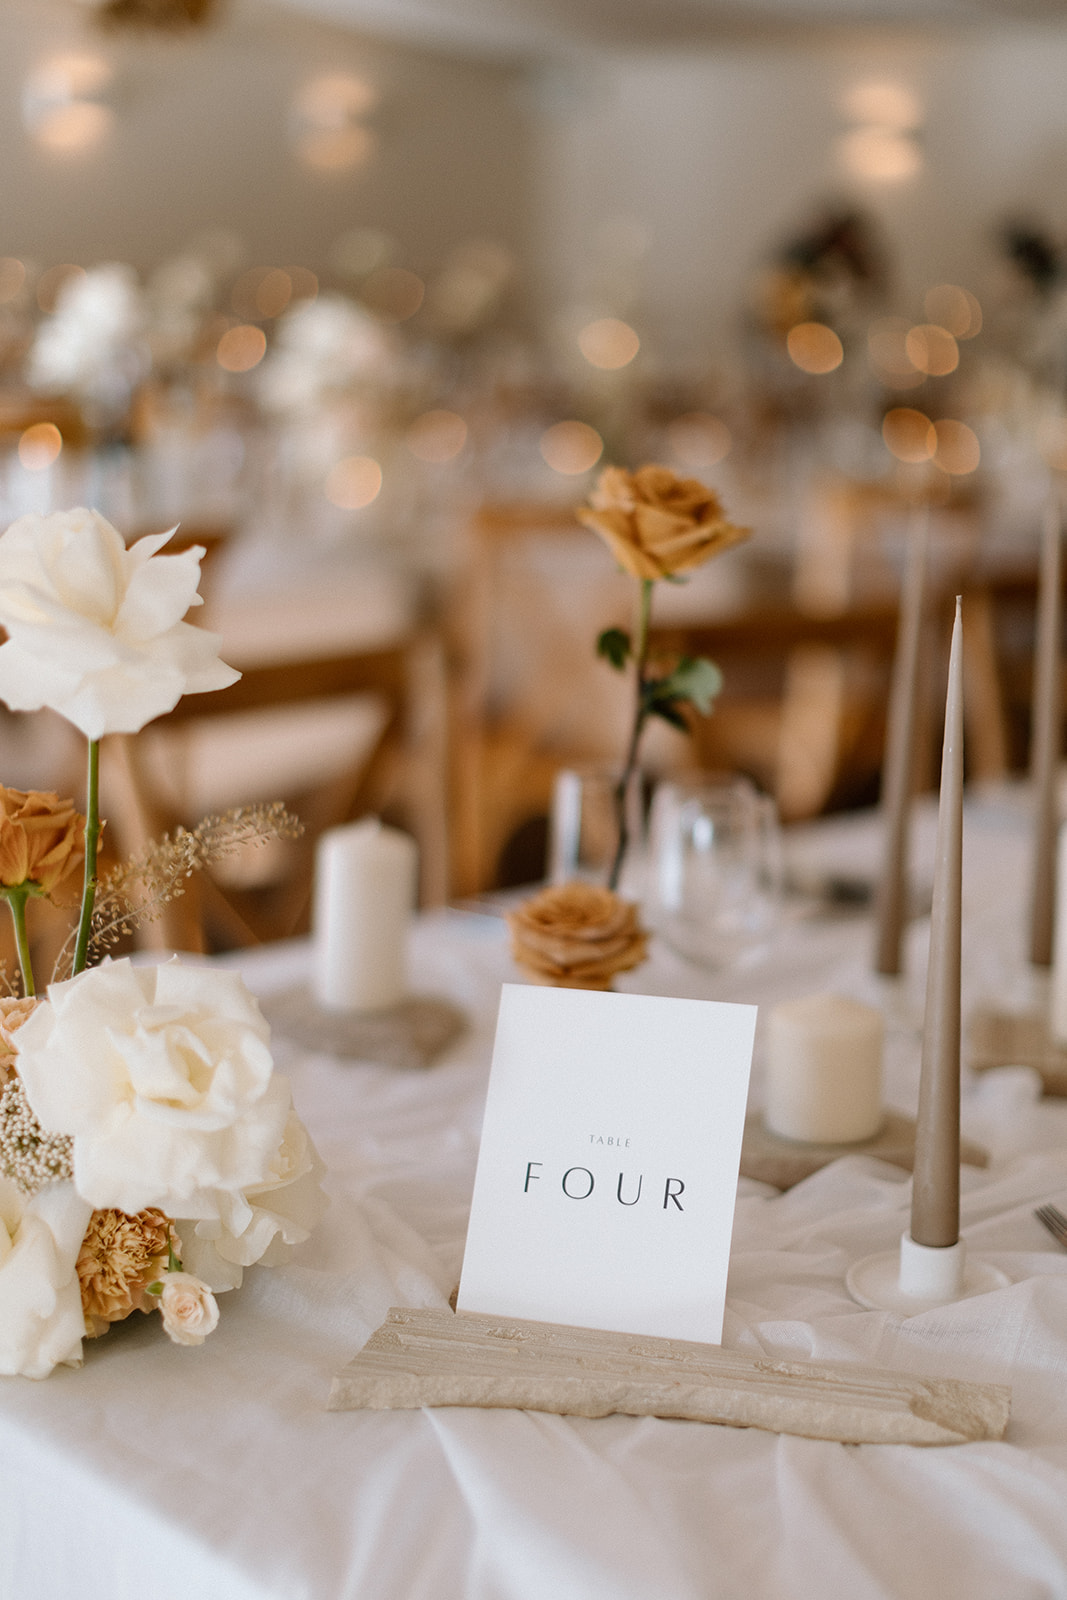 Serious September wedding glamour in this blush colour scheme wedding at Iscoyd Park by Alex Wysocki Photography